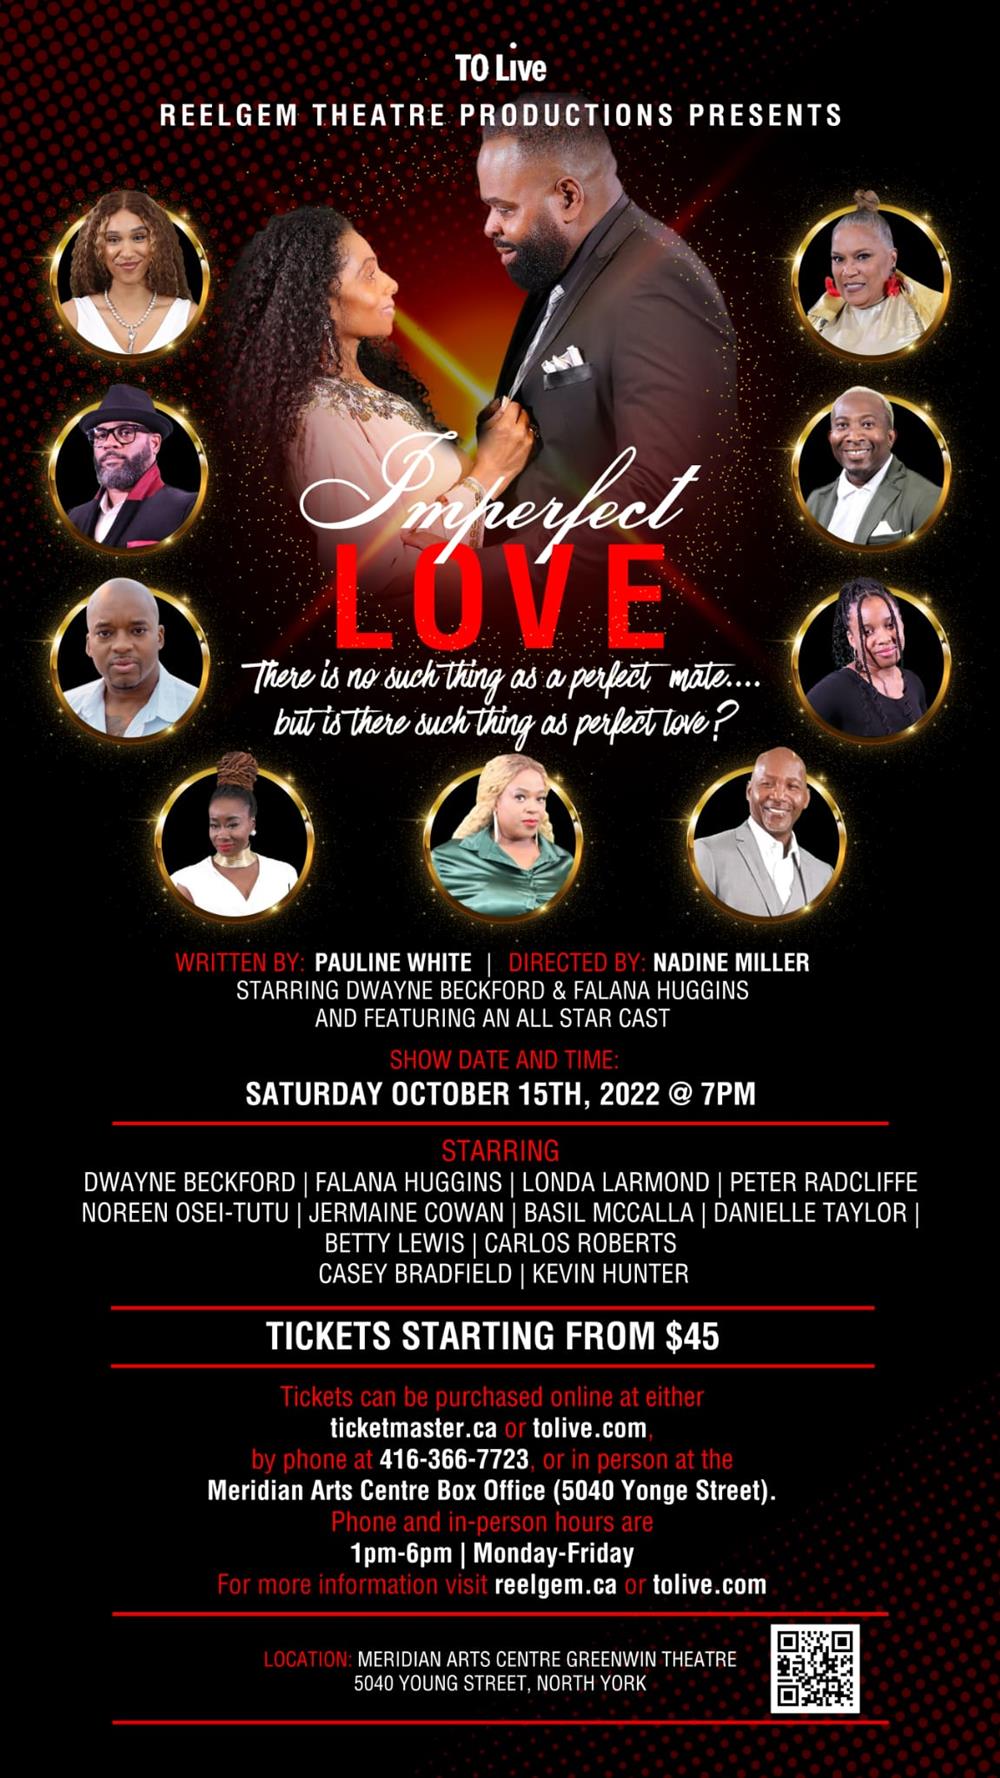 Imperfect Love: Saturday October 15th, 2022 at 7pm